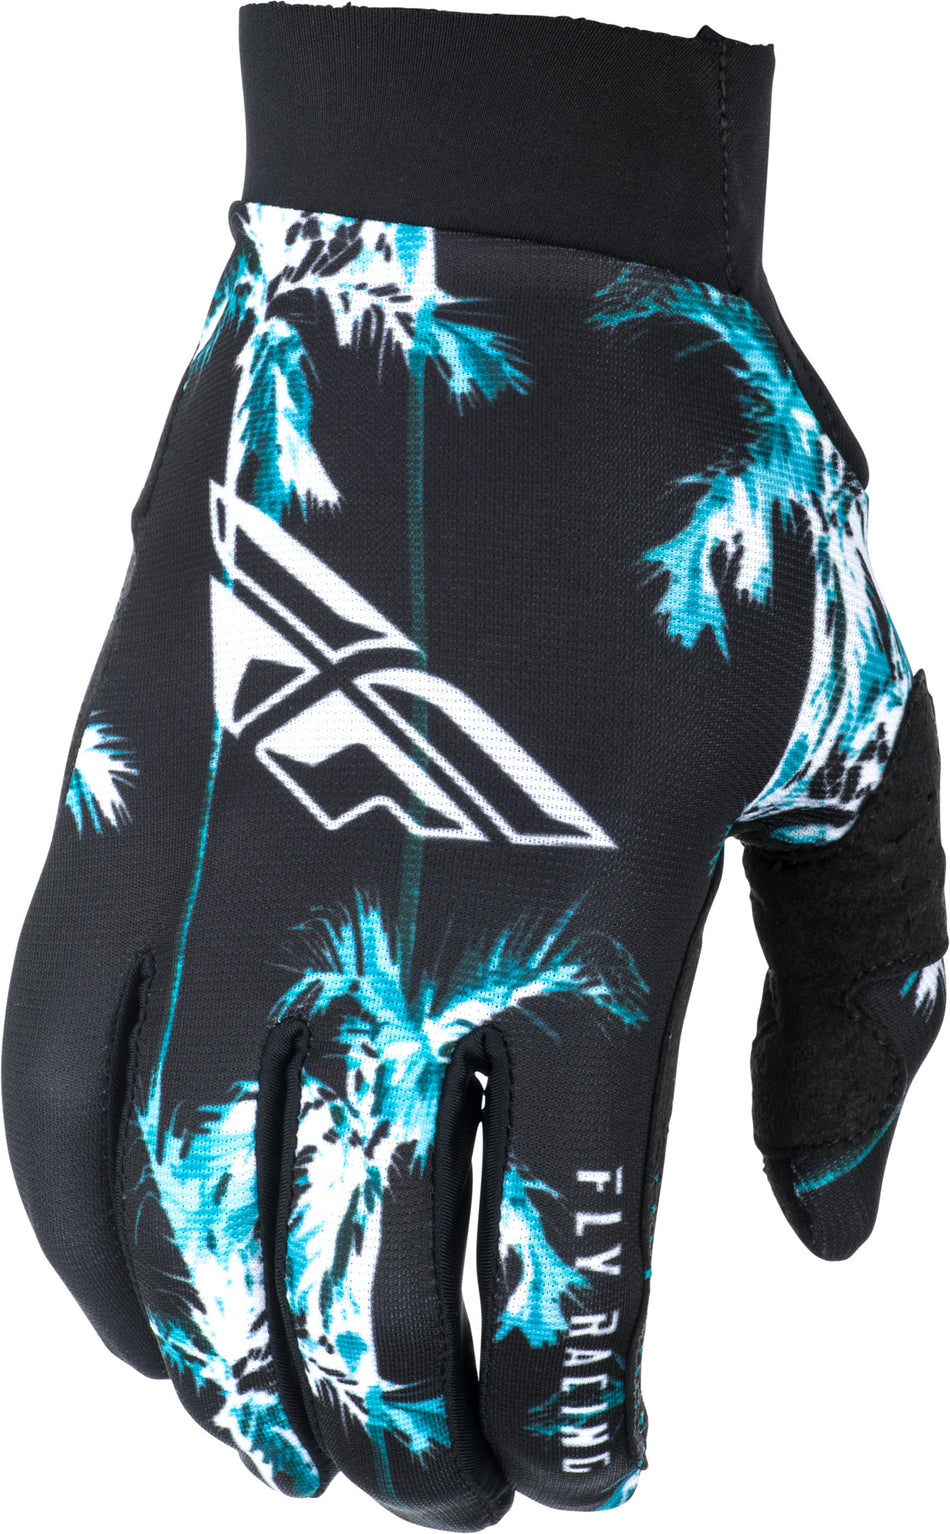 FLY RACING Pro Lite Paradise Gloves Teal/Black Sz 11 372-81911